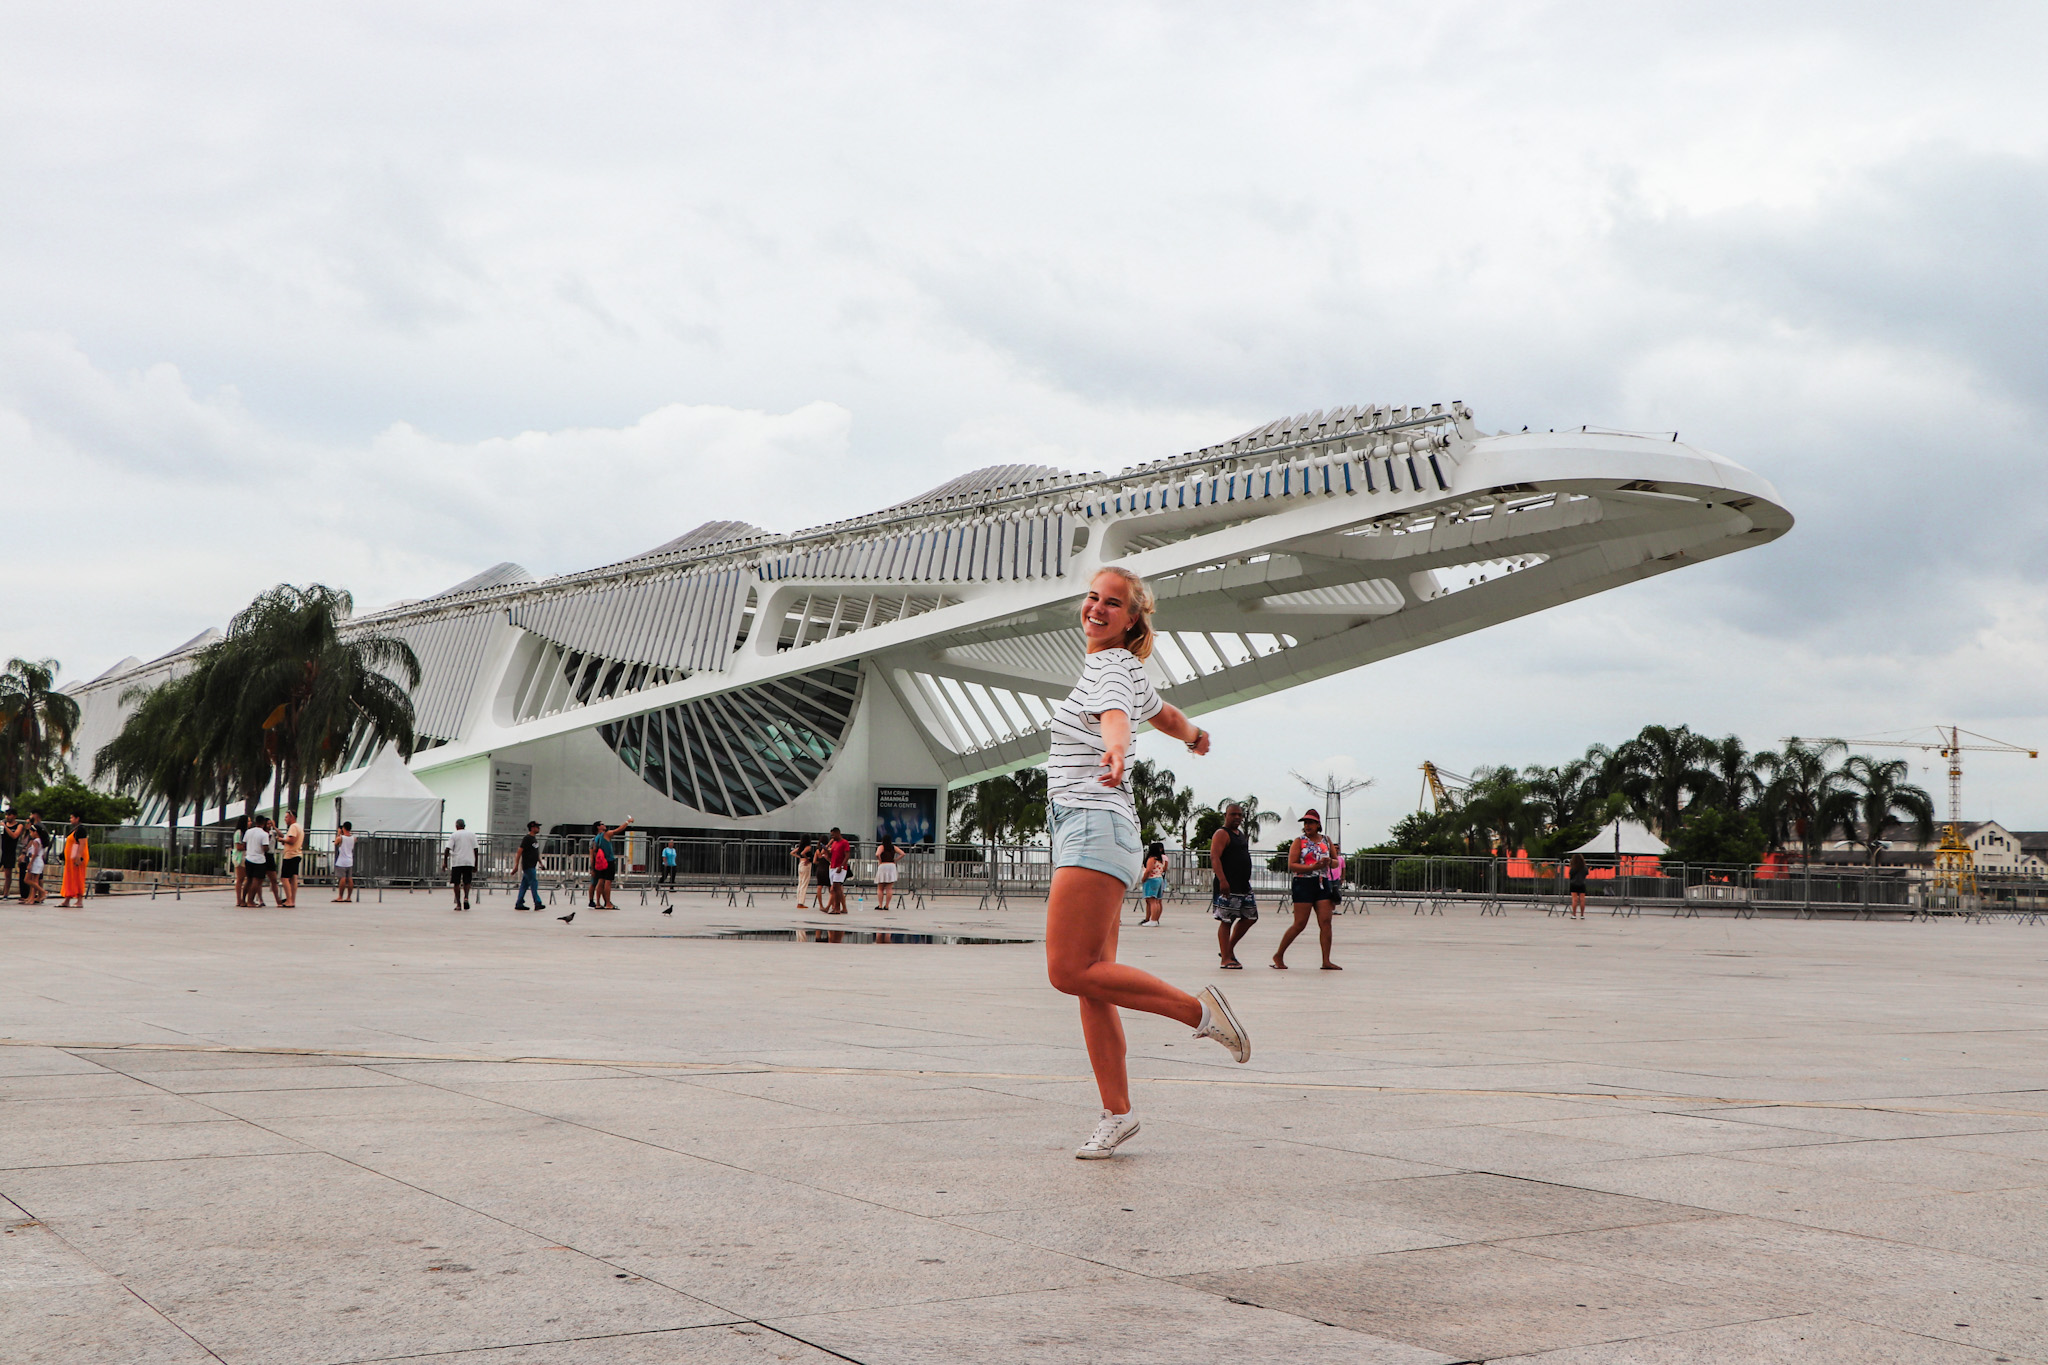 Things to do in Rio: Visit the museum of tomorrow